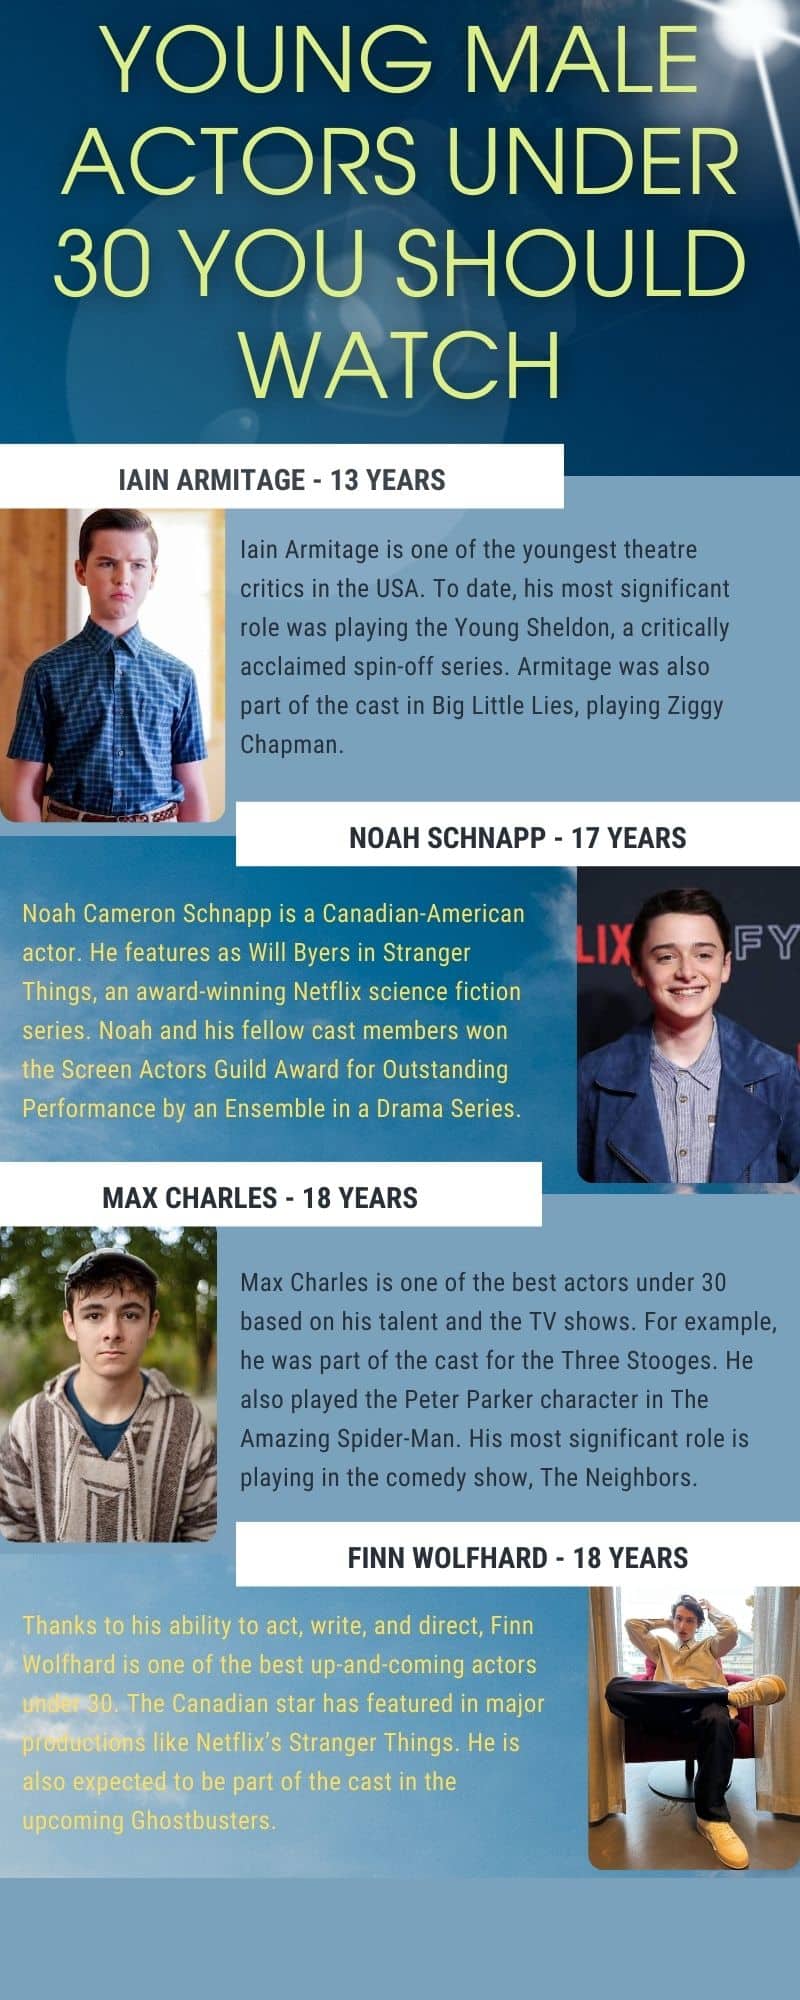 young male actors under 30